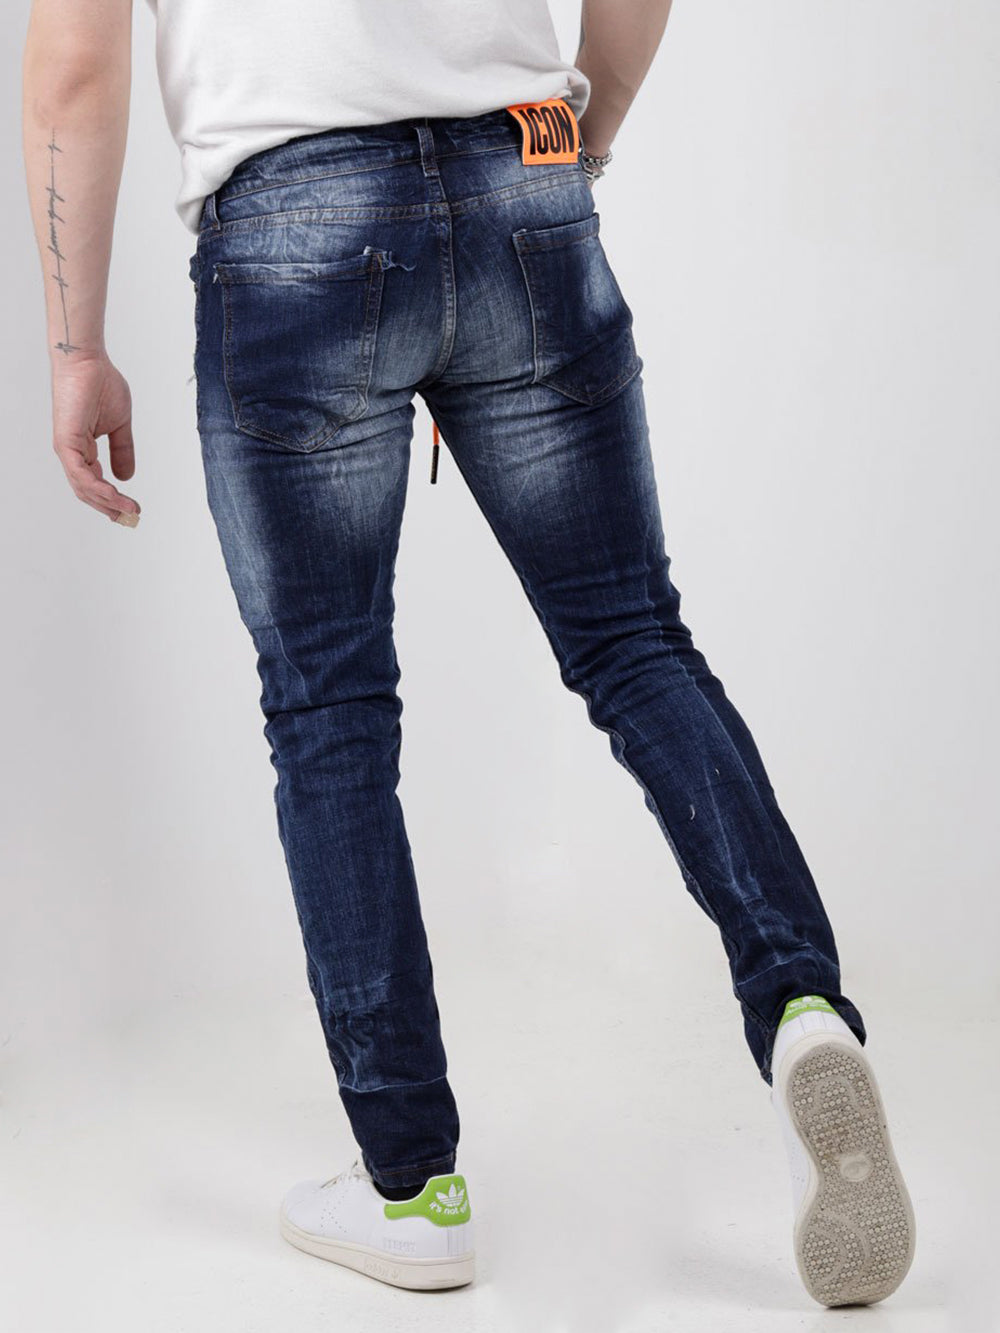 The back view of a man wearing GRAPHITE jeans.